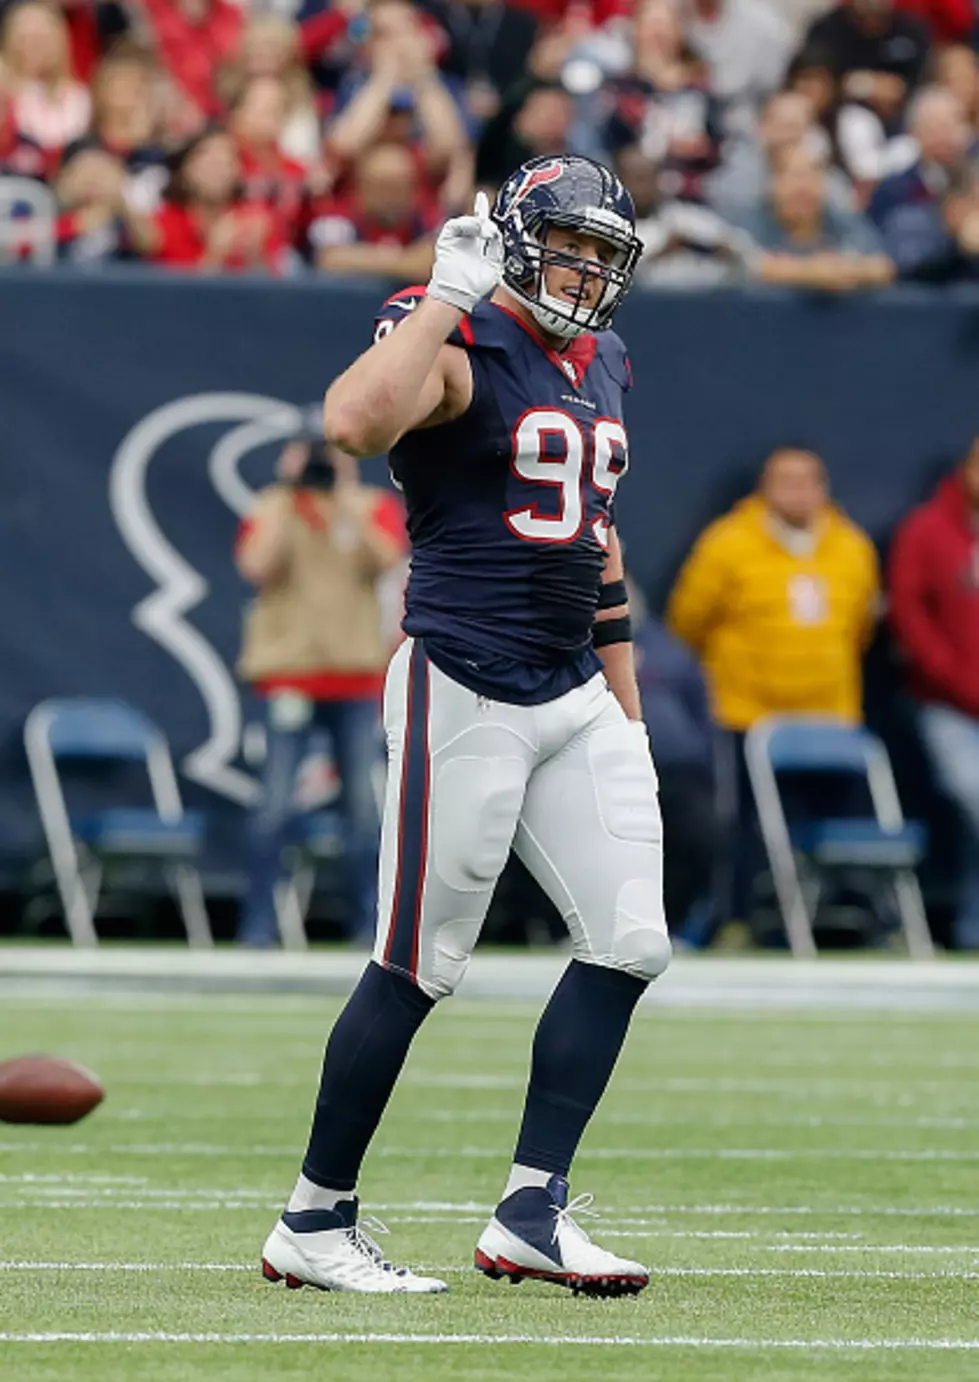 ‘J.J. Watt Will Sack You’ is the NFL Song Parody You Need This Weekend [VIDEO]